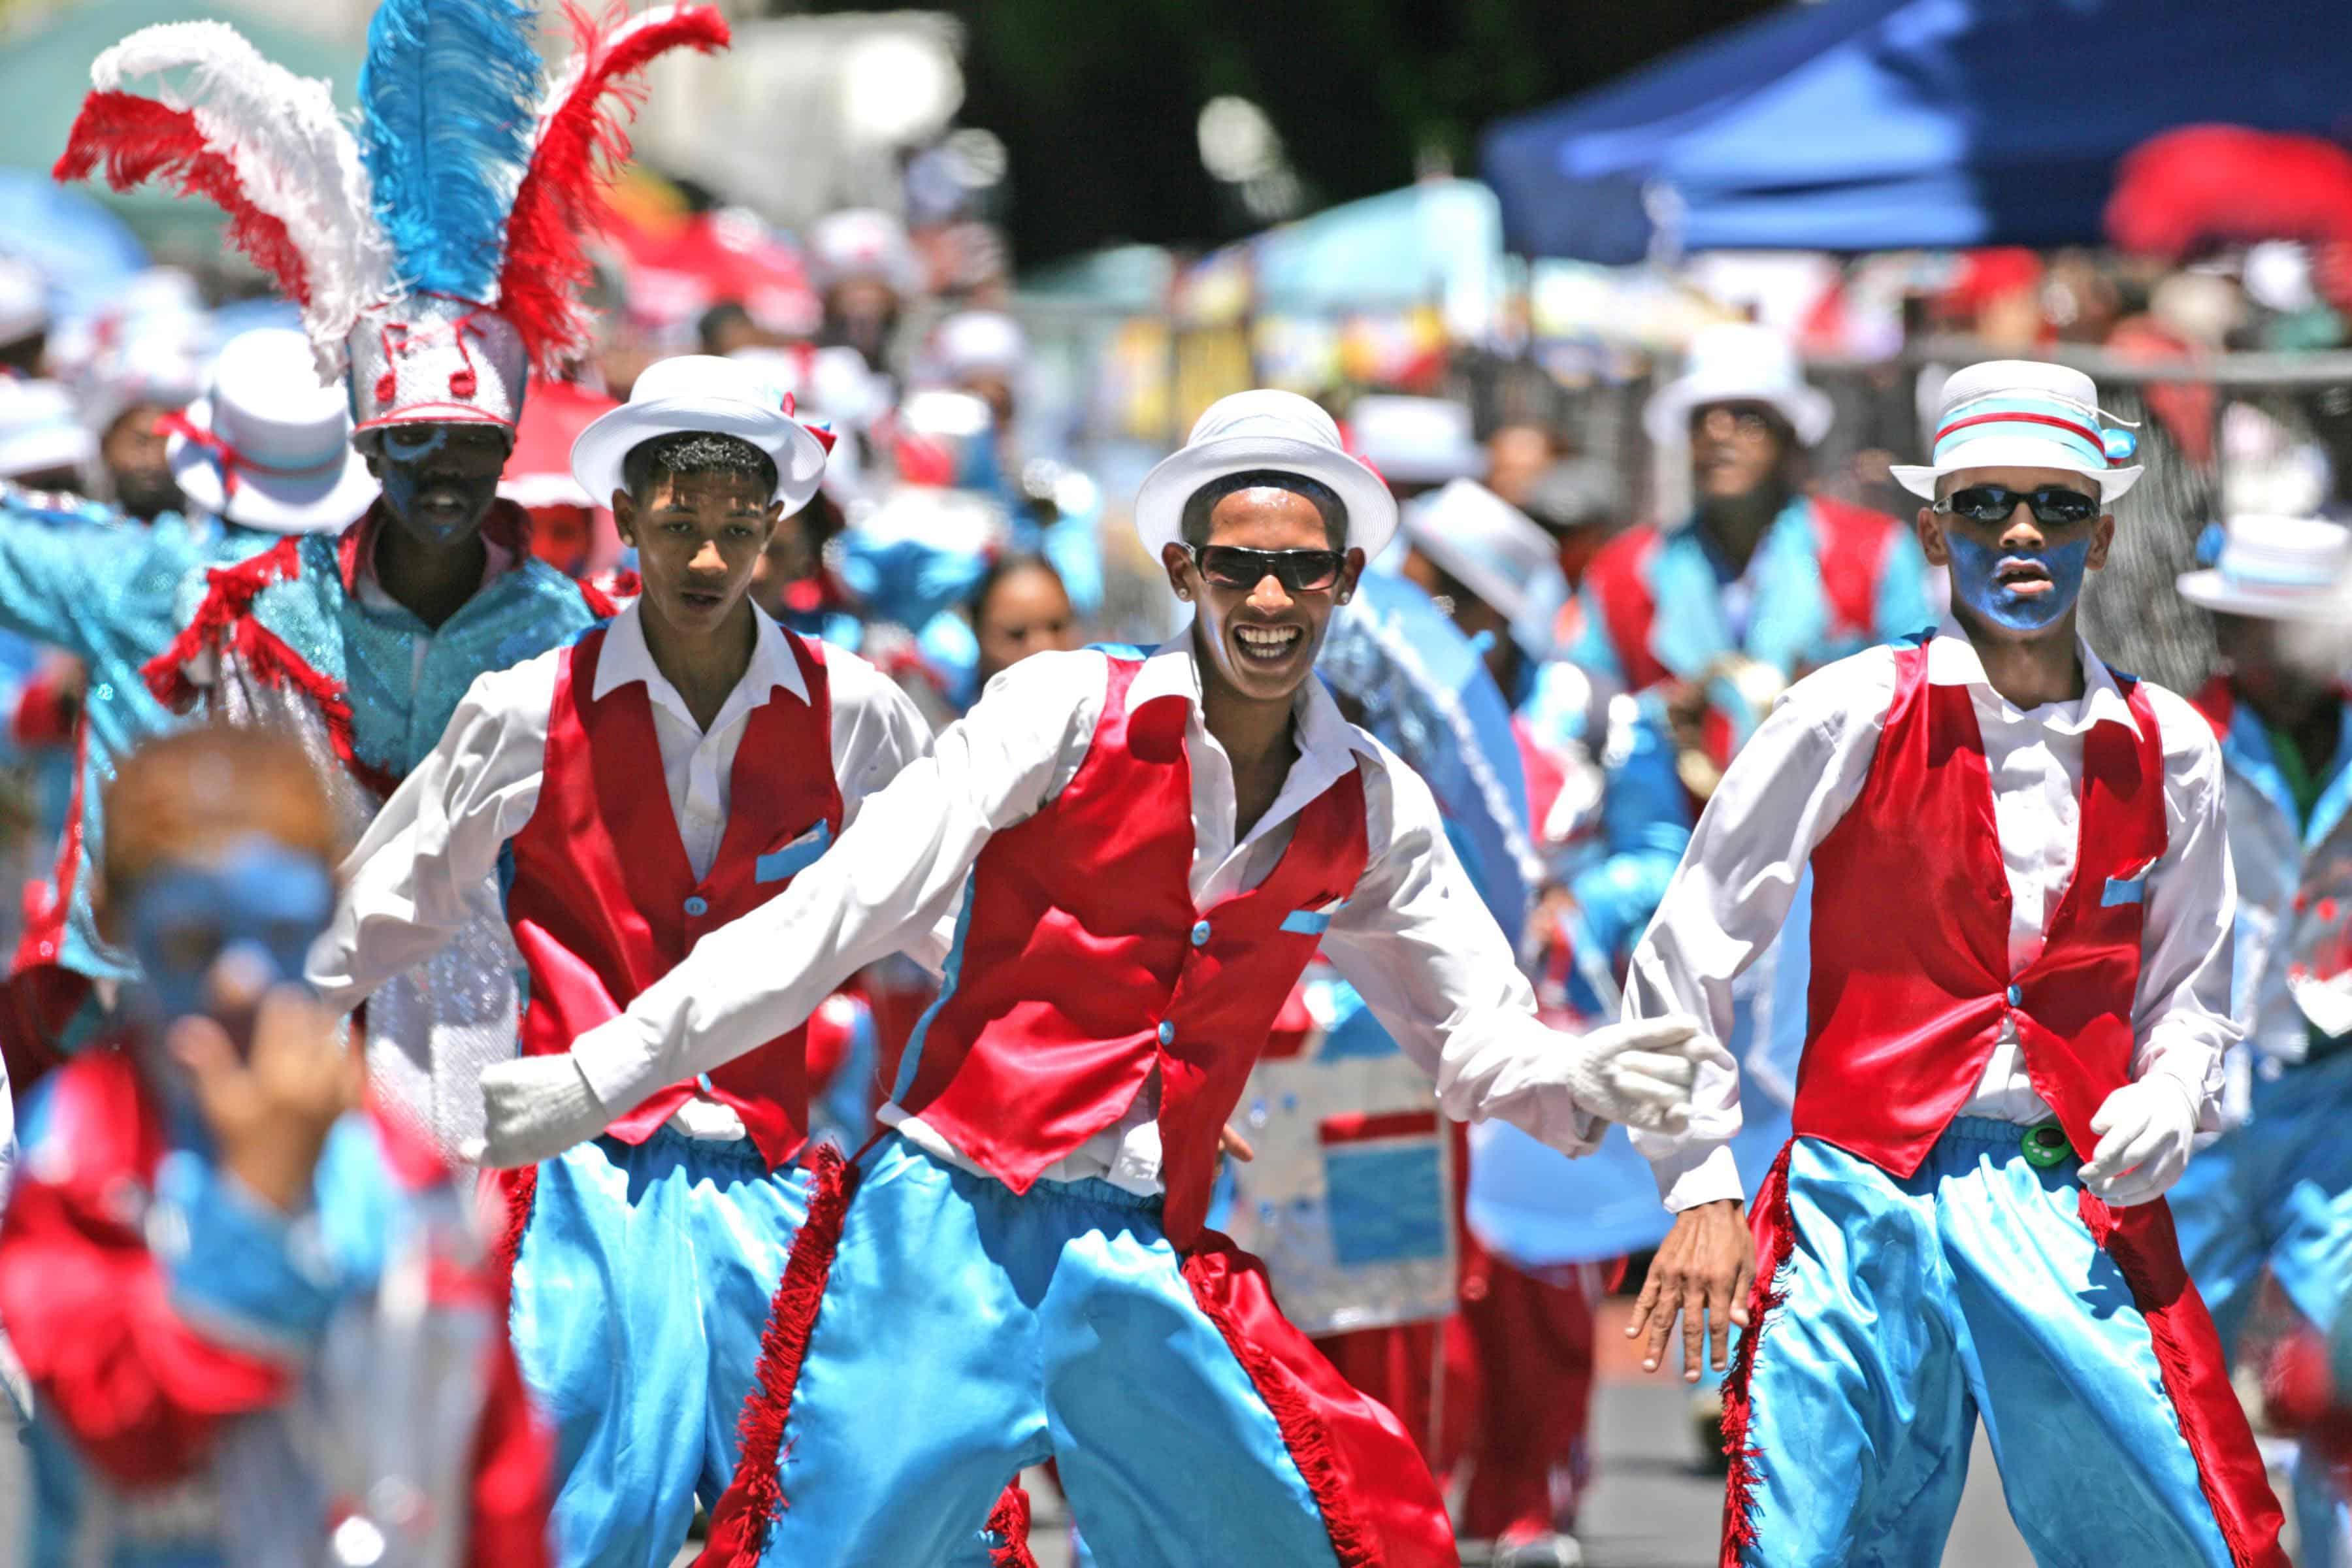 Minstrels performing in Cape Town